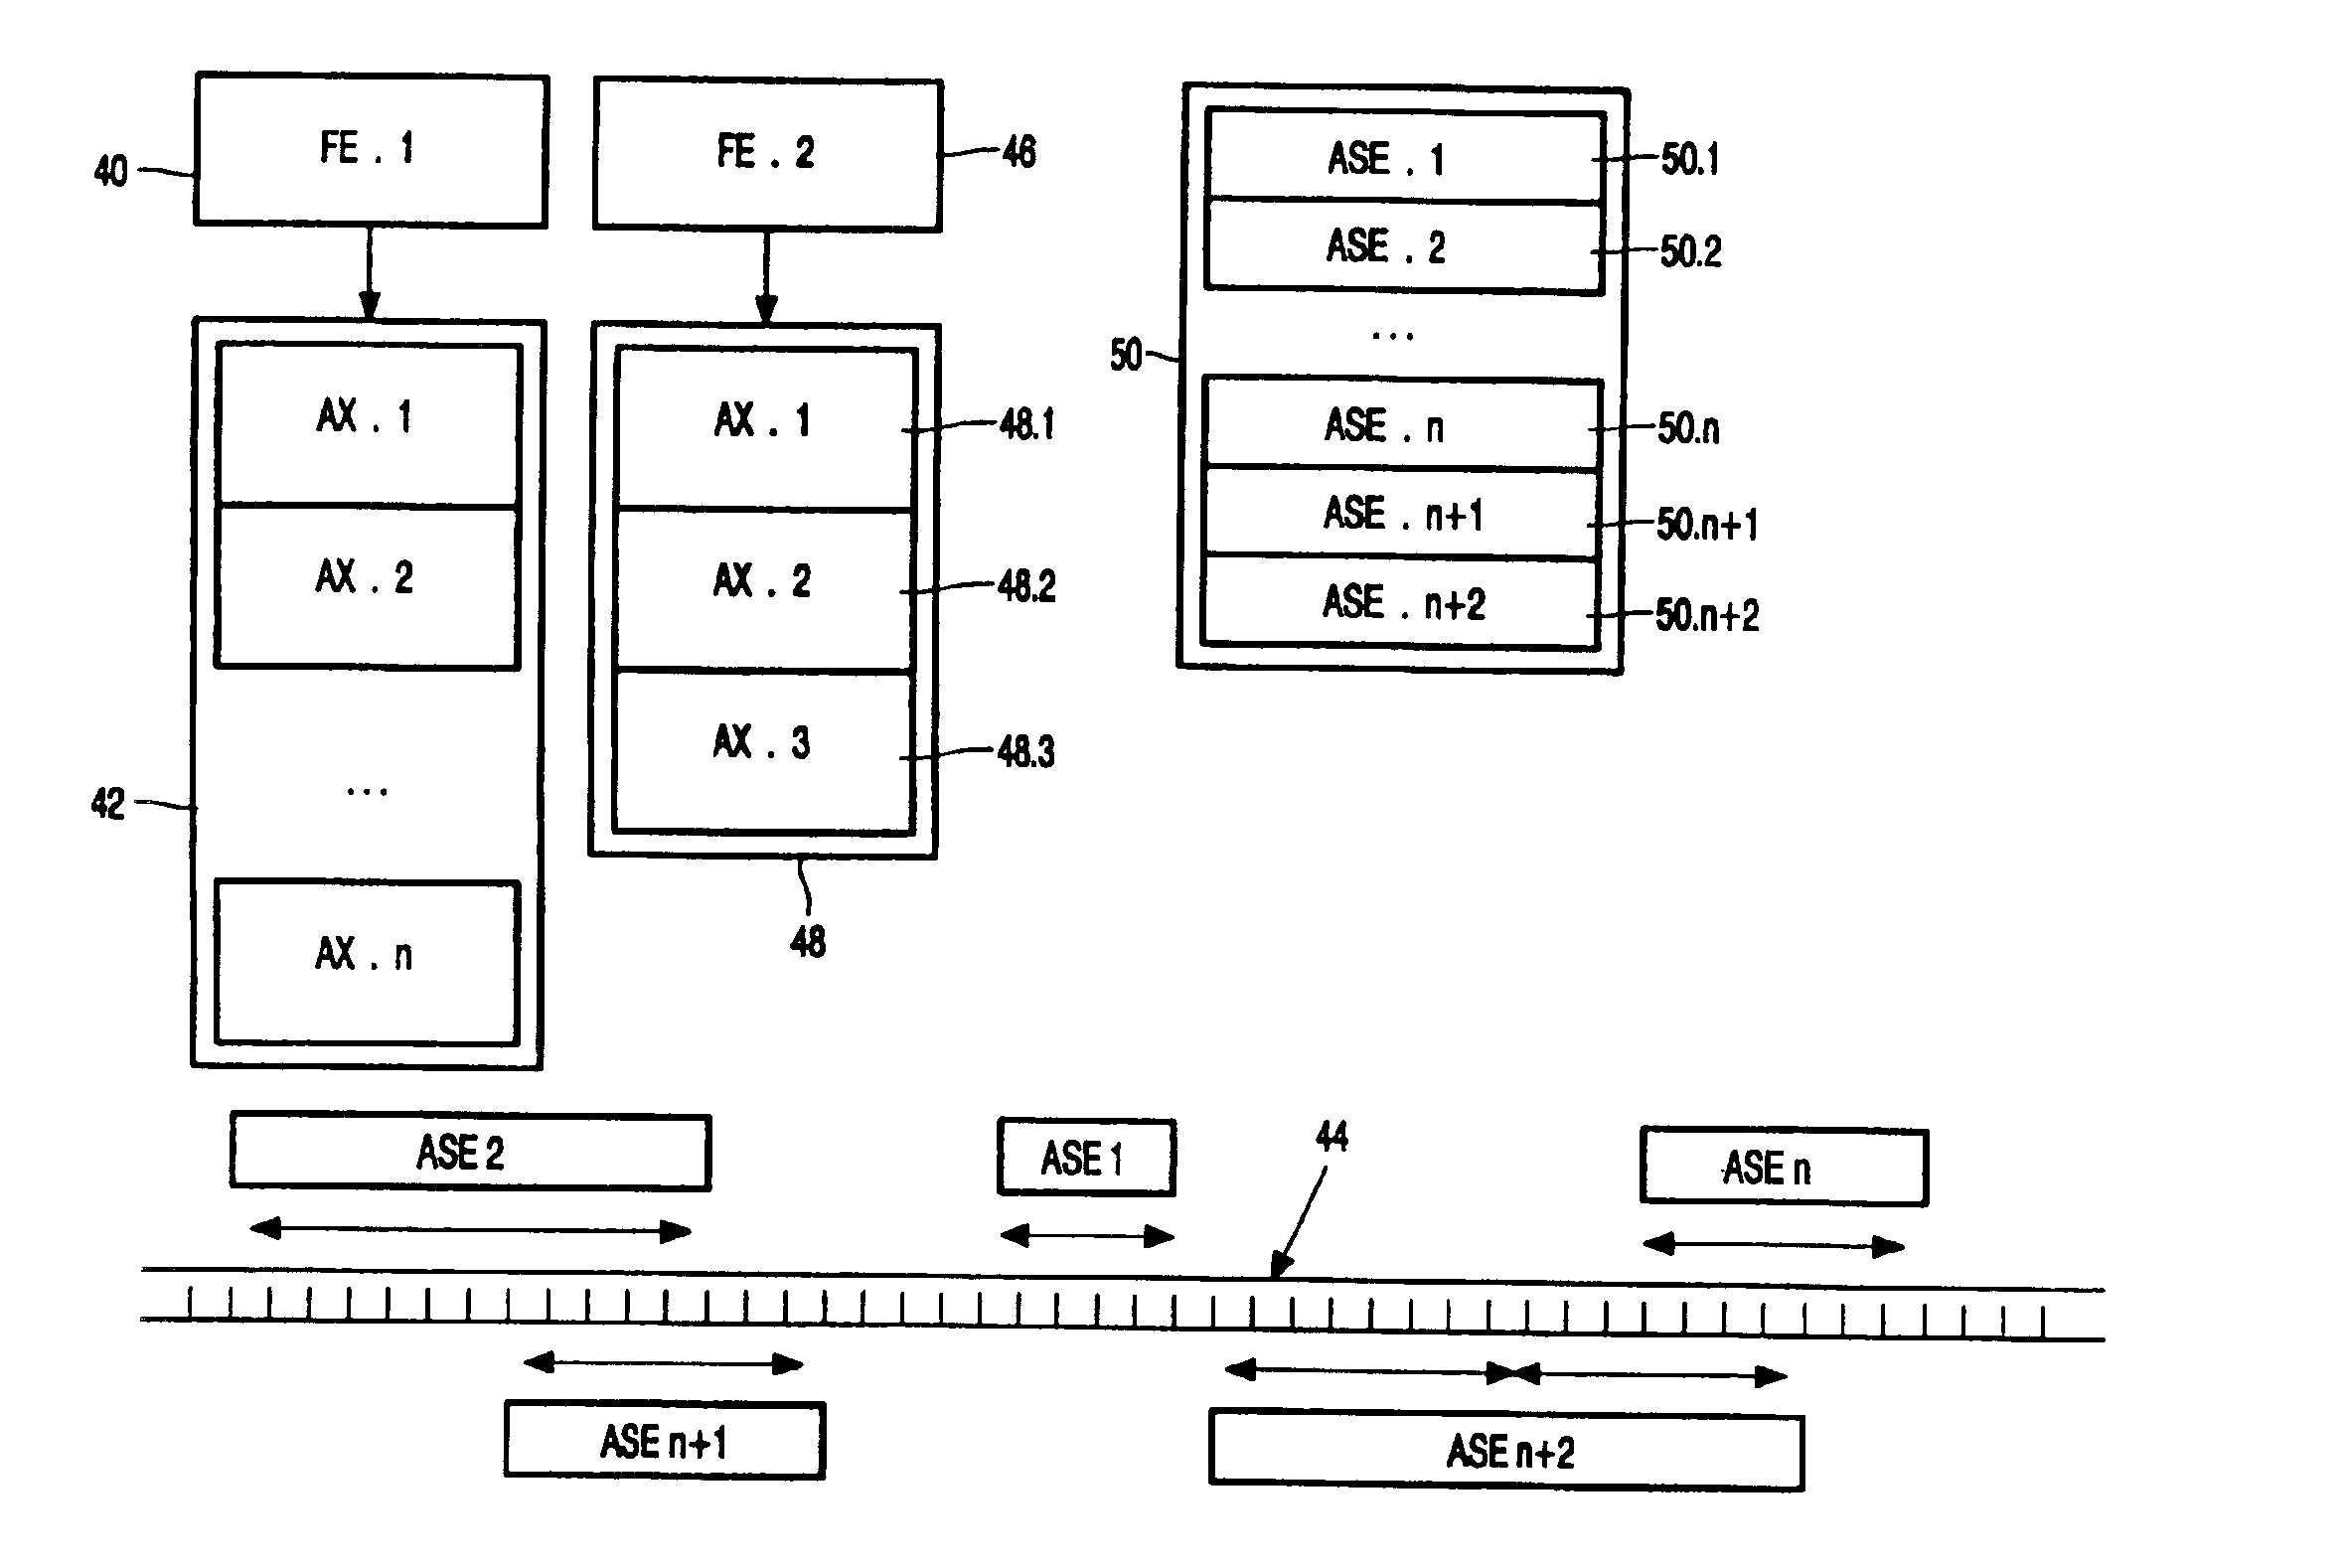 File systems supported data sharing